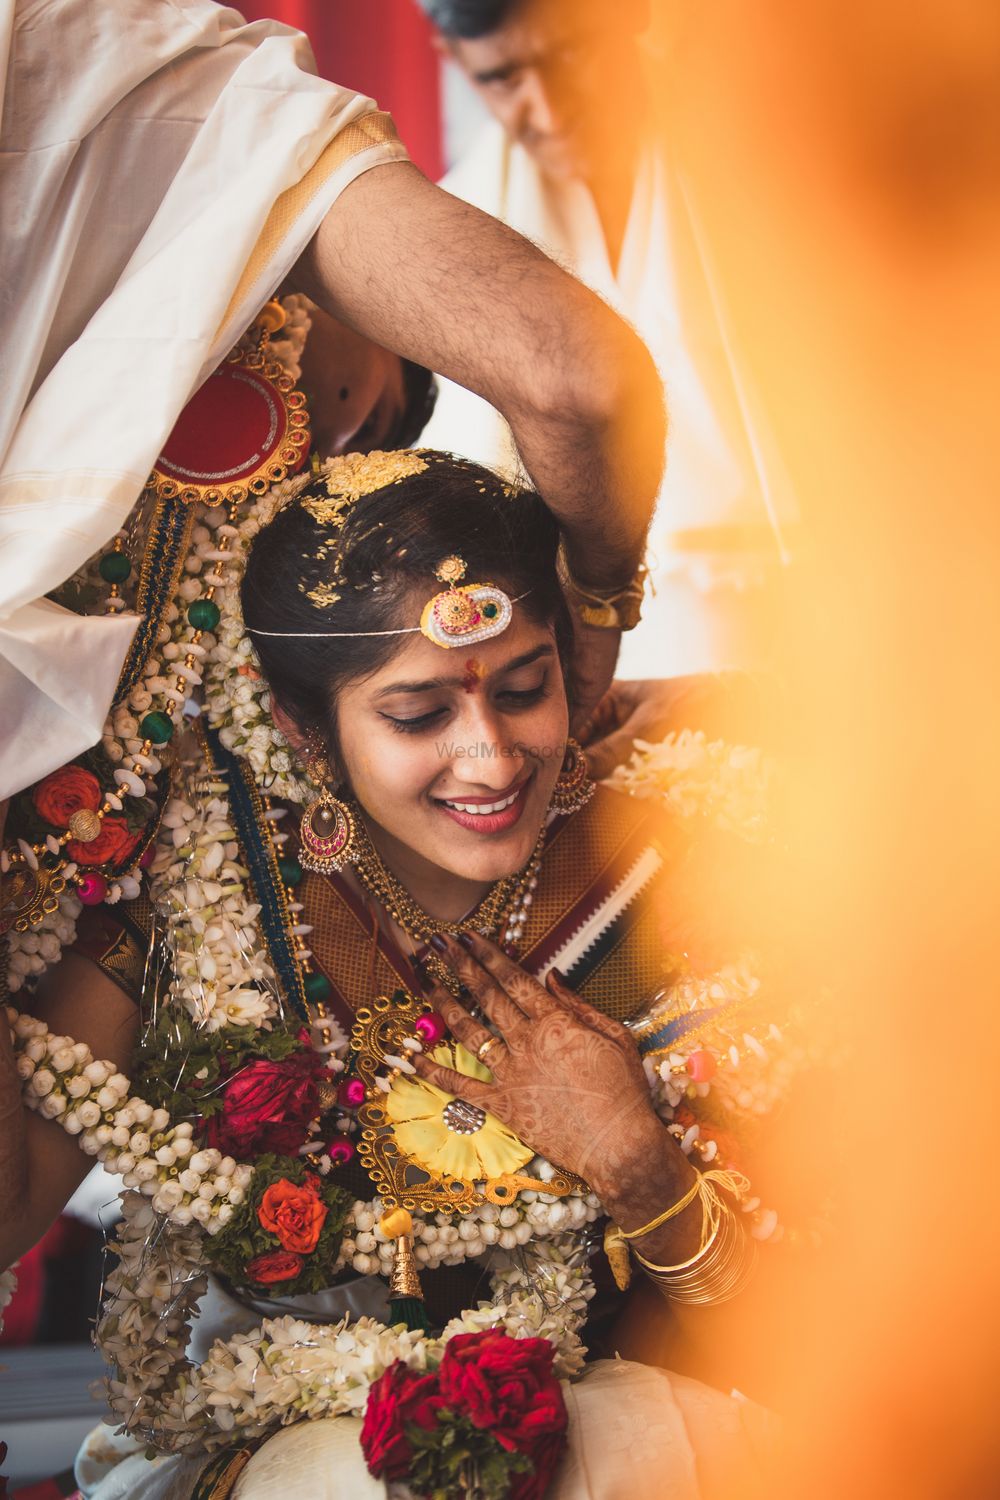 Photo From Temple Weddings - By Within The Frame